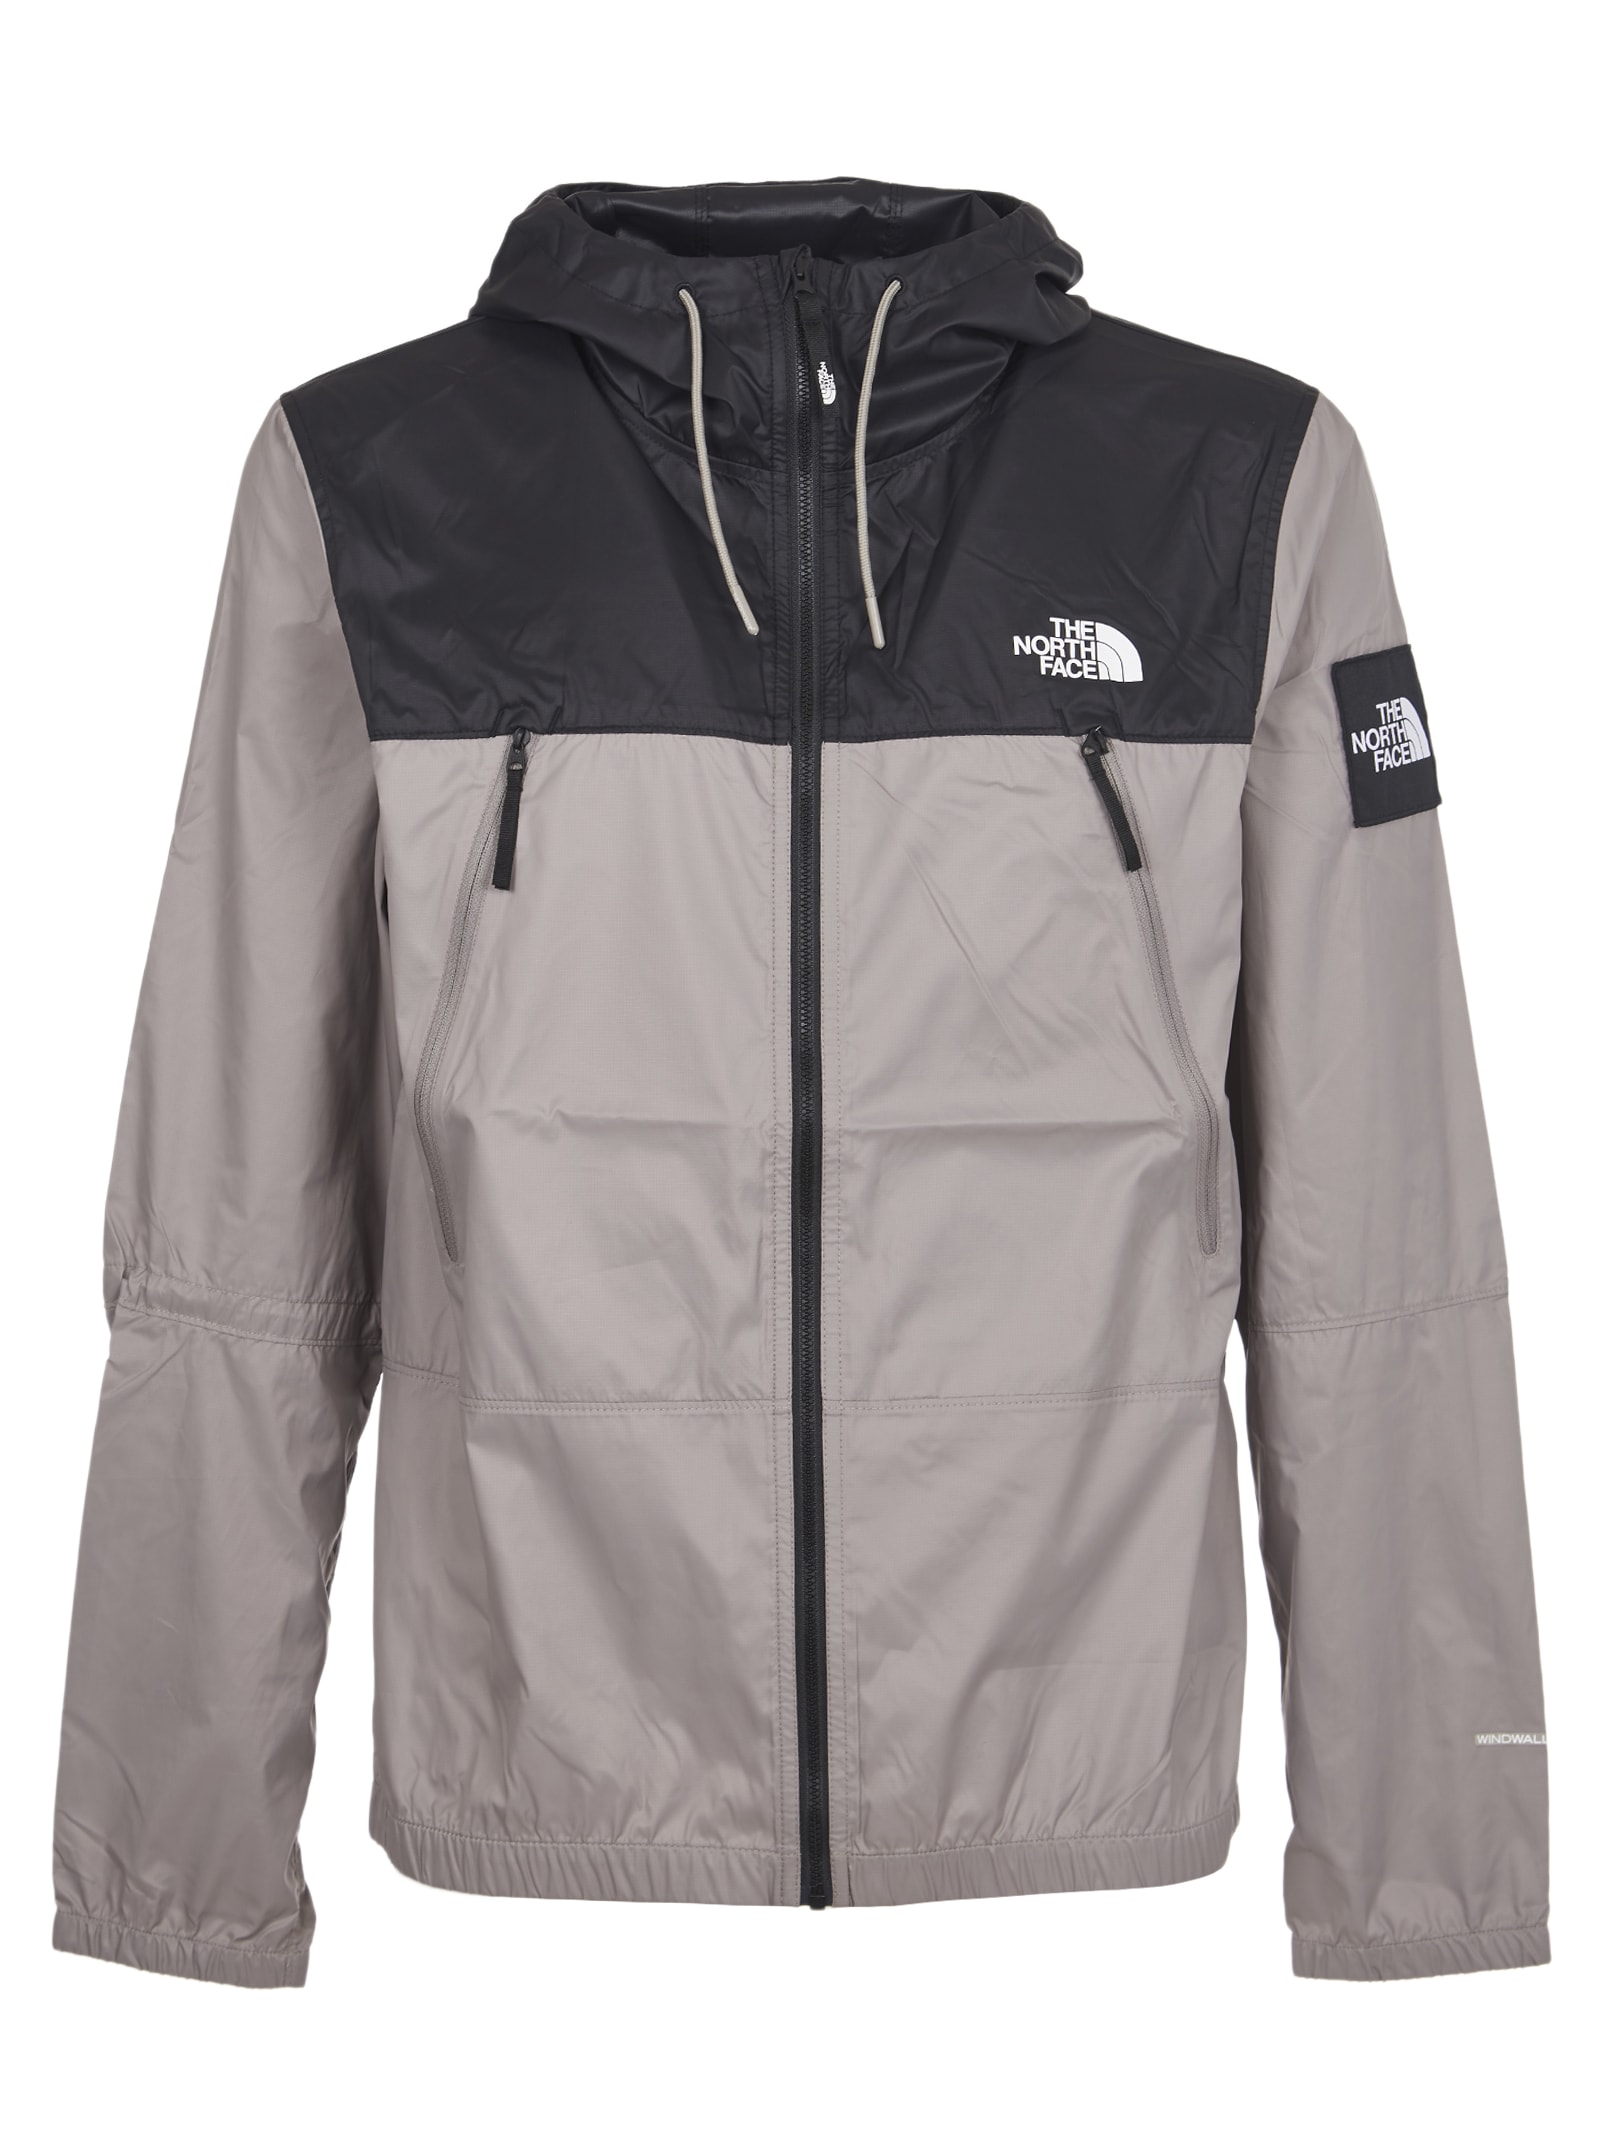 The North Face Black And Grey Mountain Jacket 1990